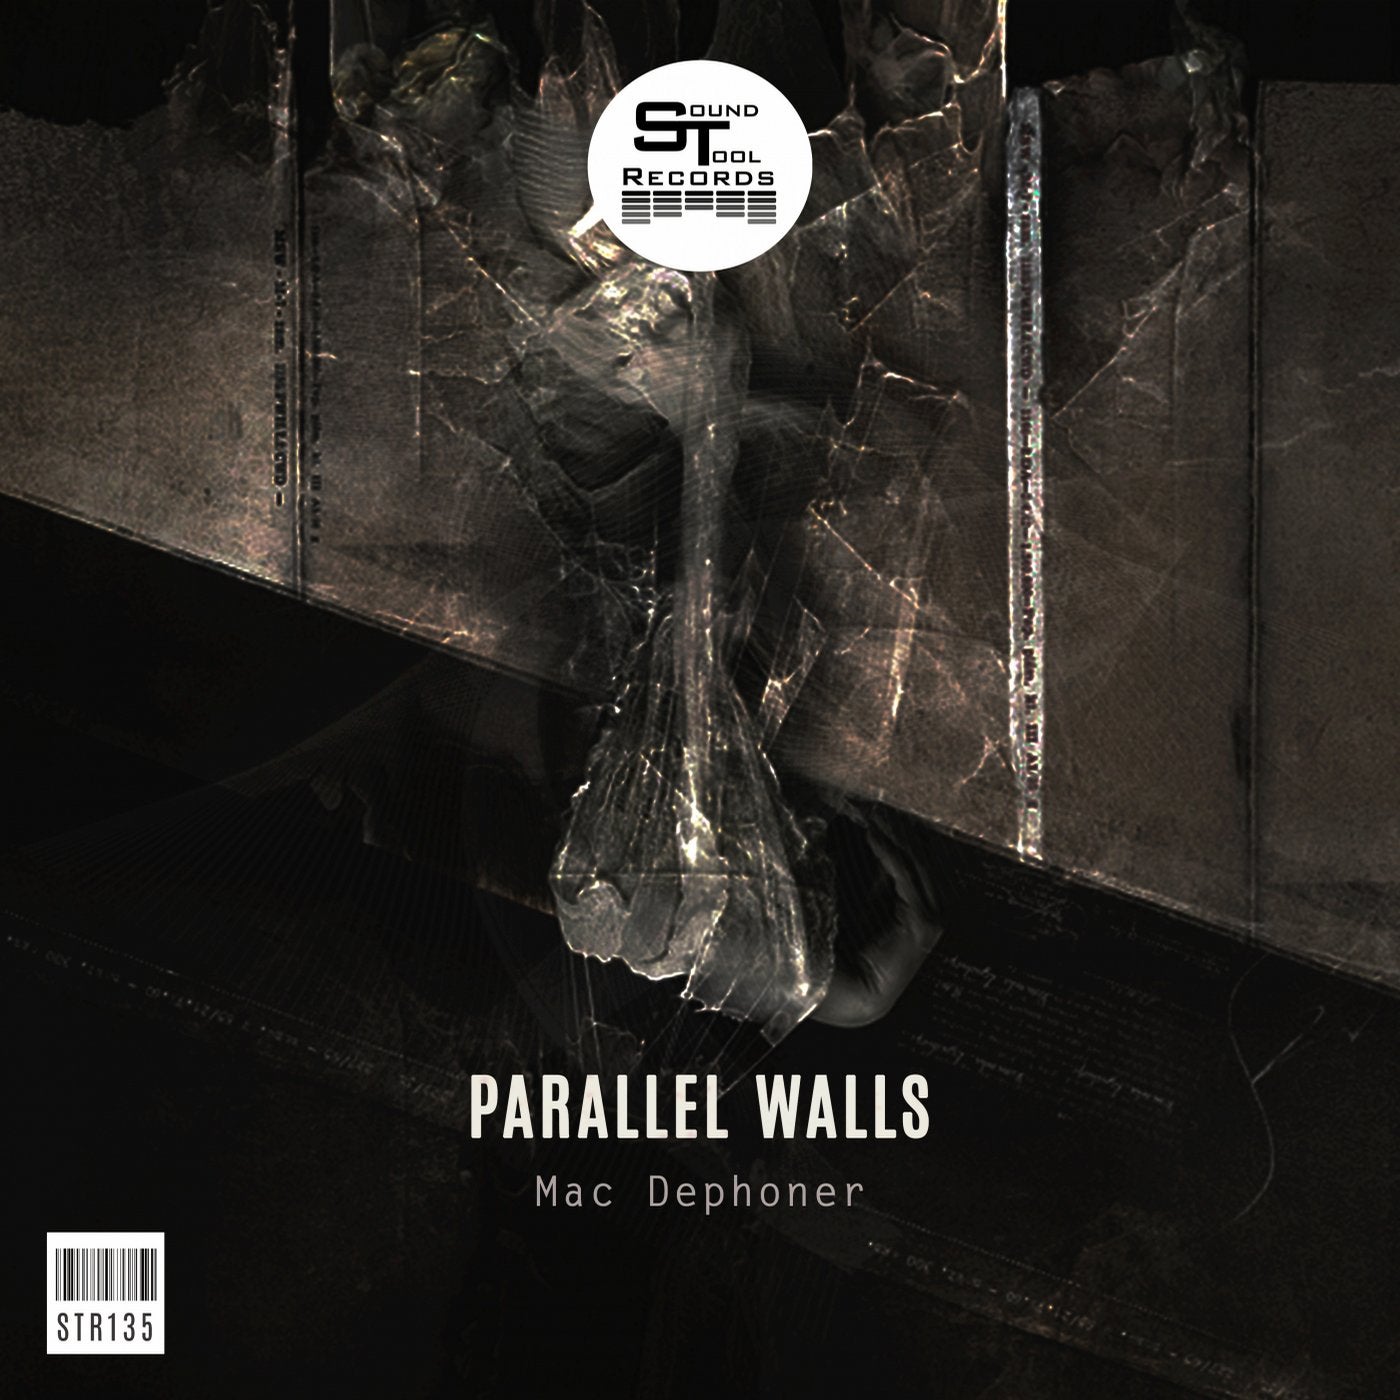 Parallel Walls. Parallel to the Wall. Label: Sounds and Frequencies recordings Genre: Melodic House. Walls original mix